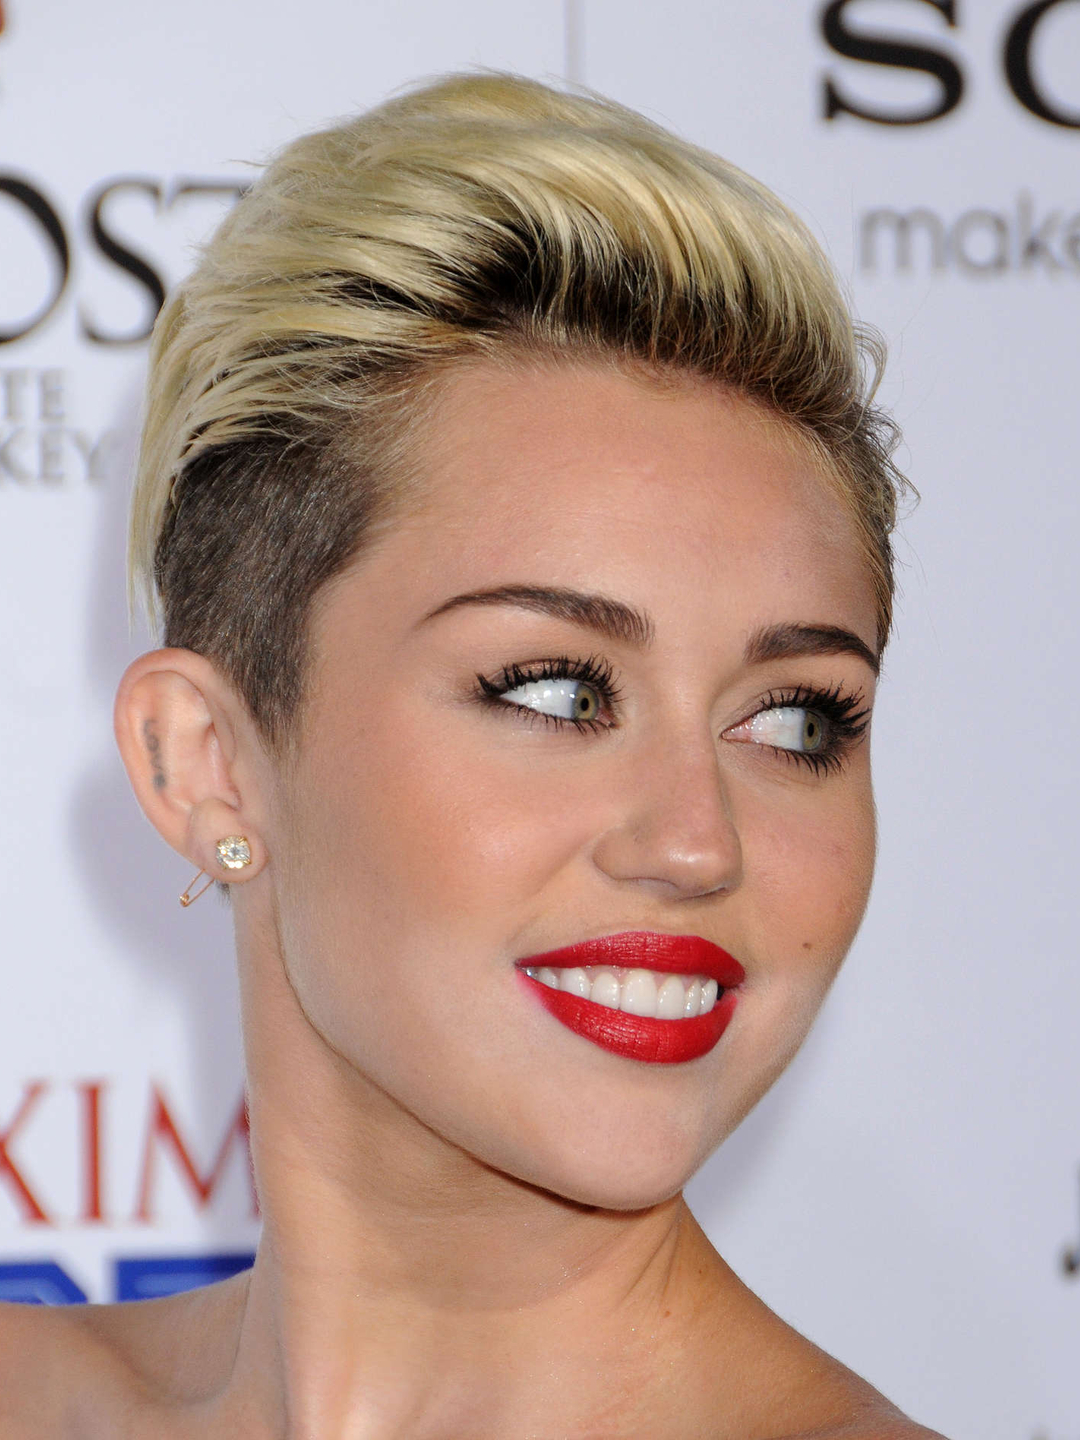 Miley Cyrus date of birth